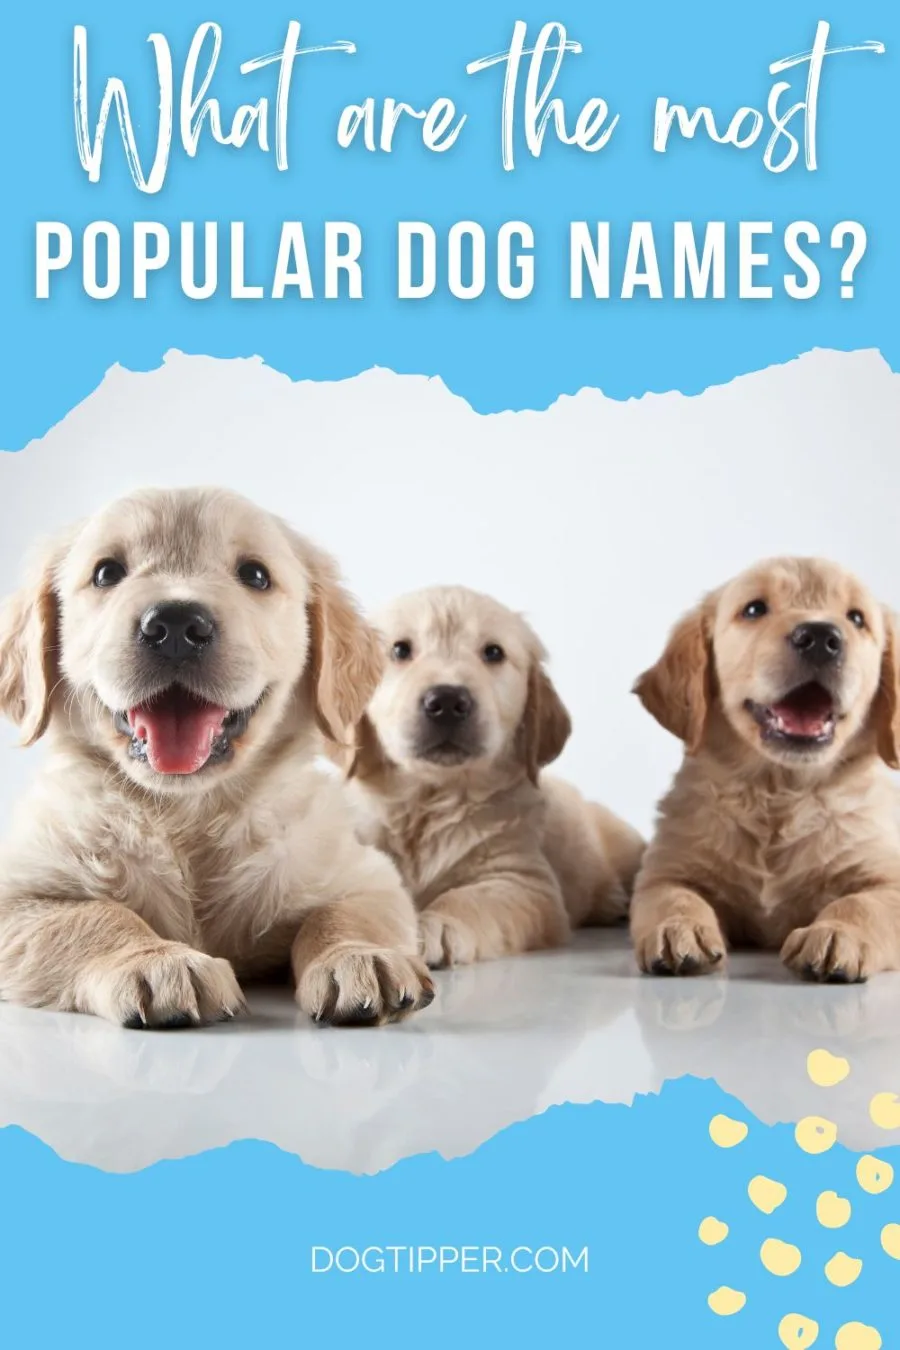 What are the most popular dog names?